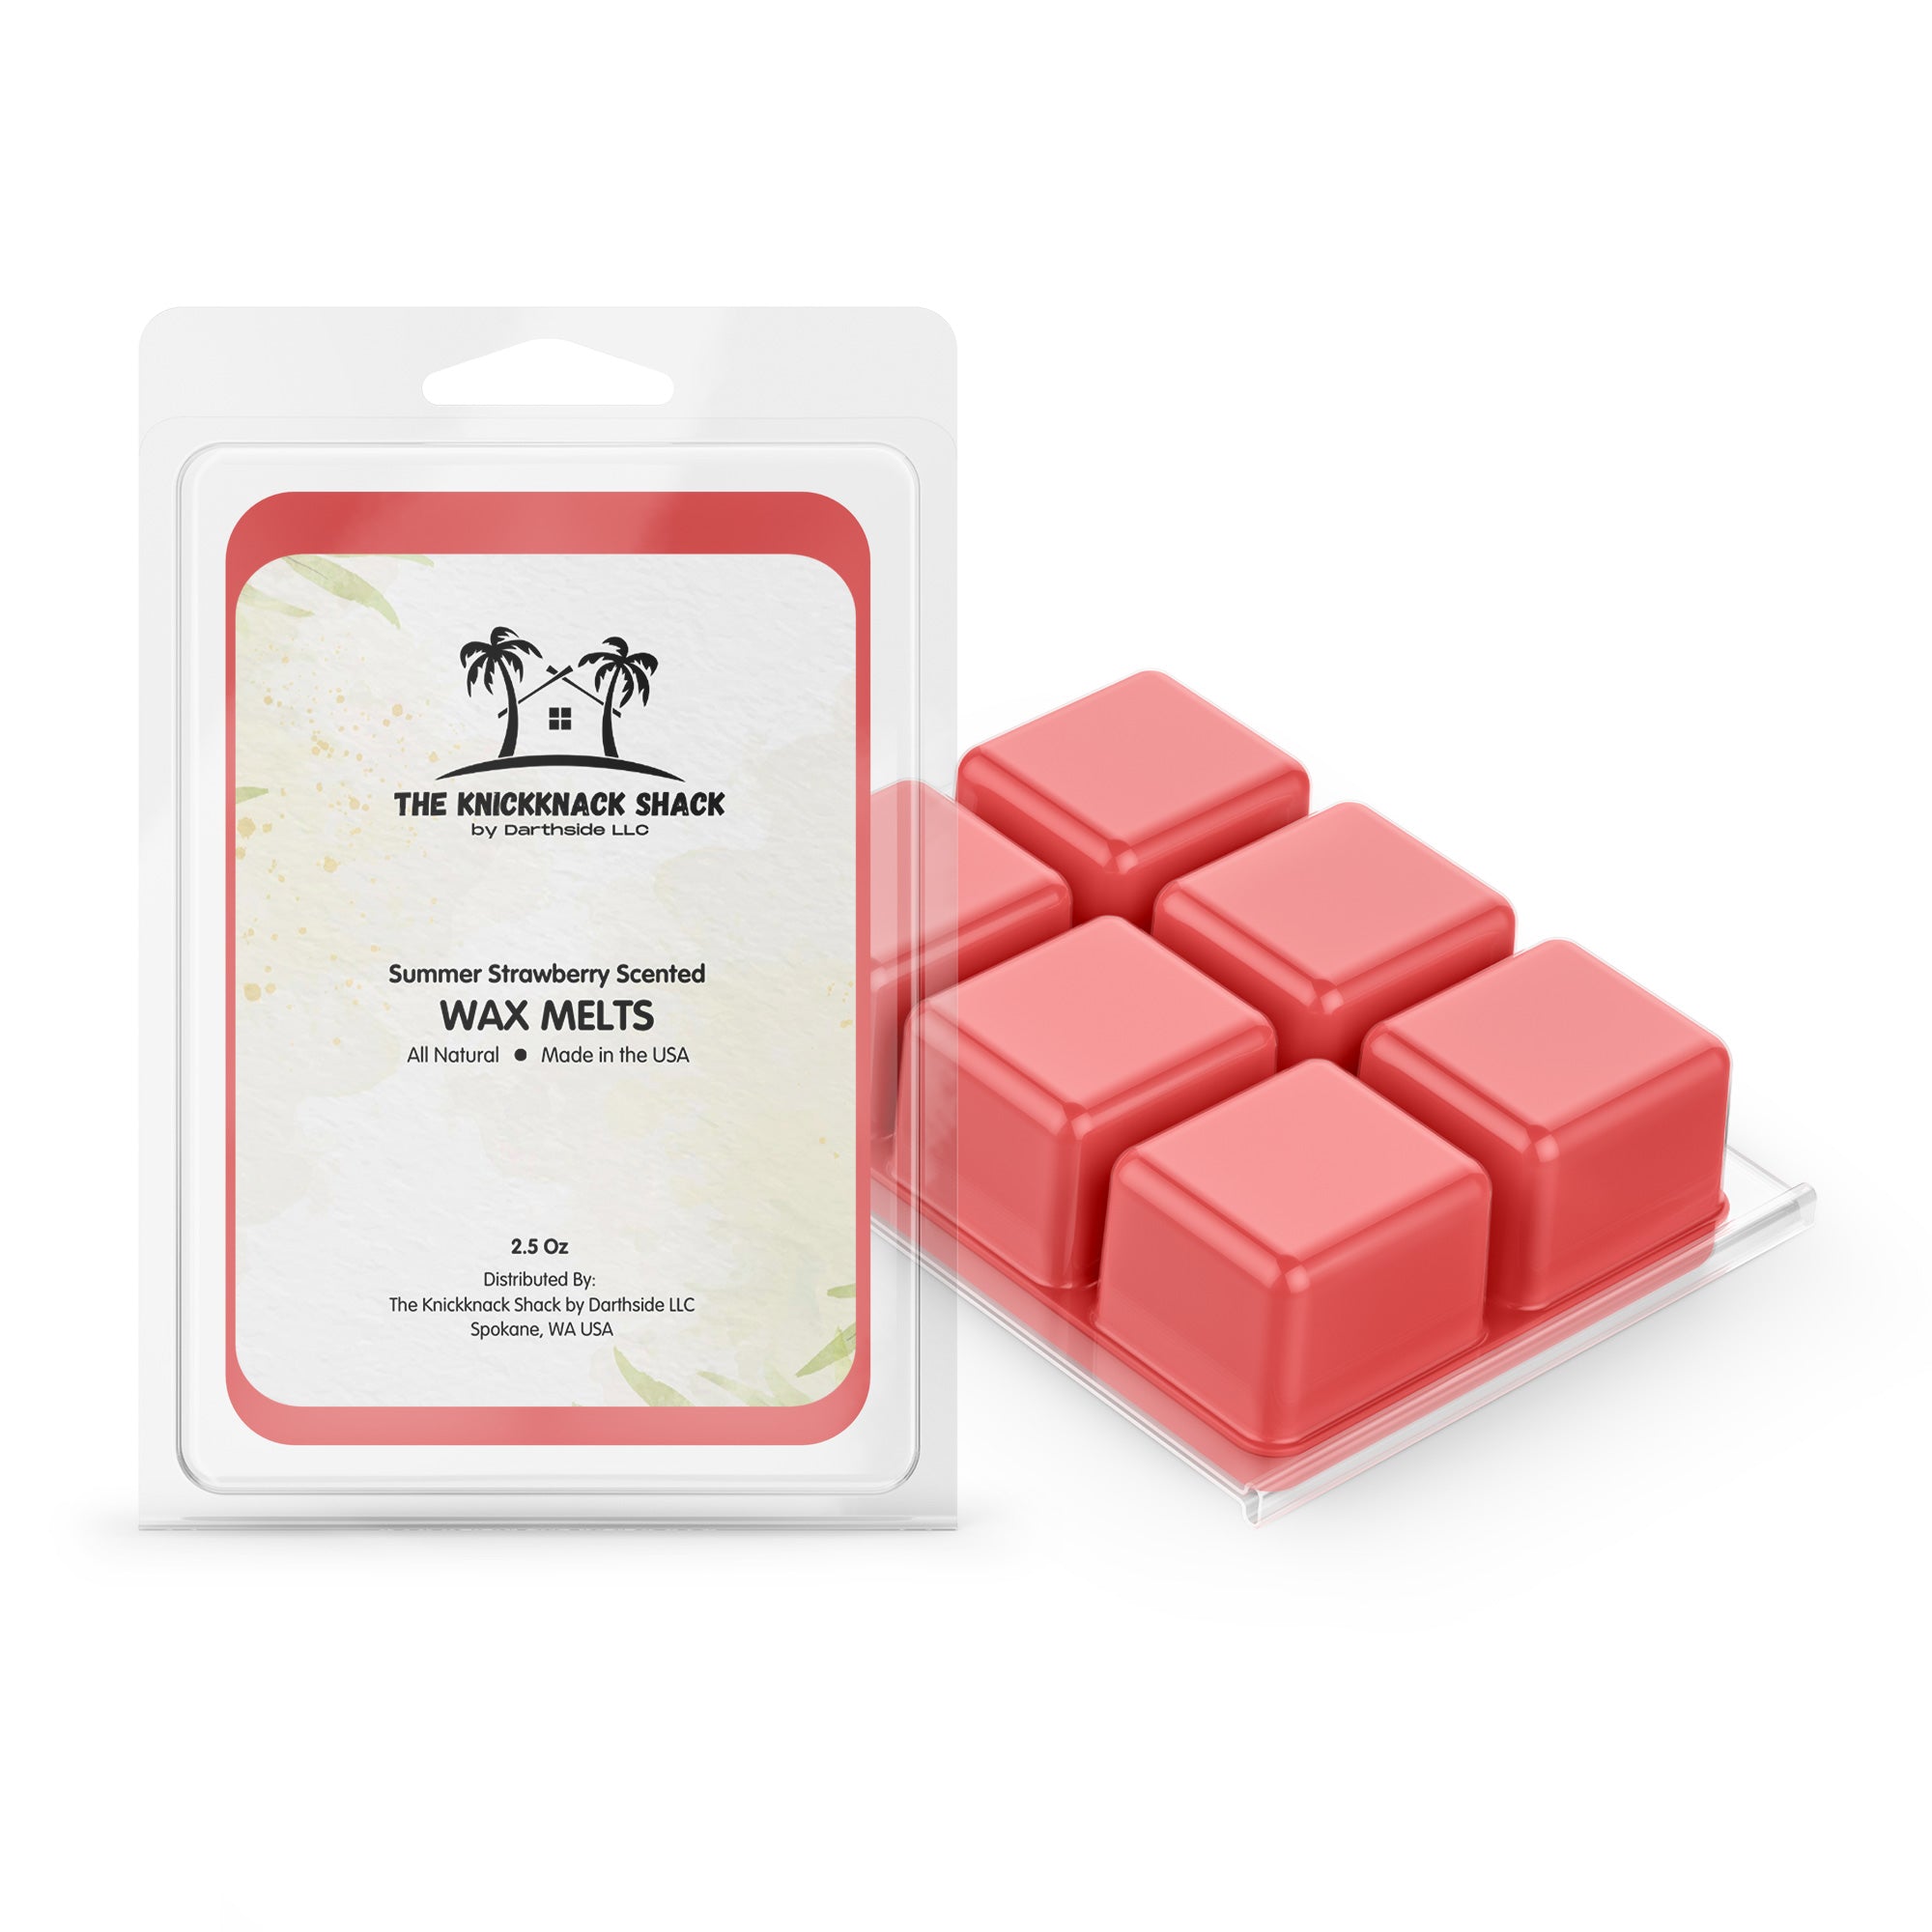 Summer Strawberry Scented Wax Melts